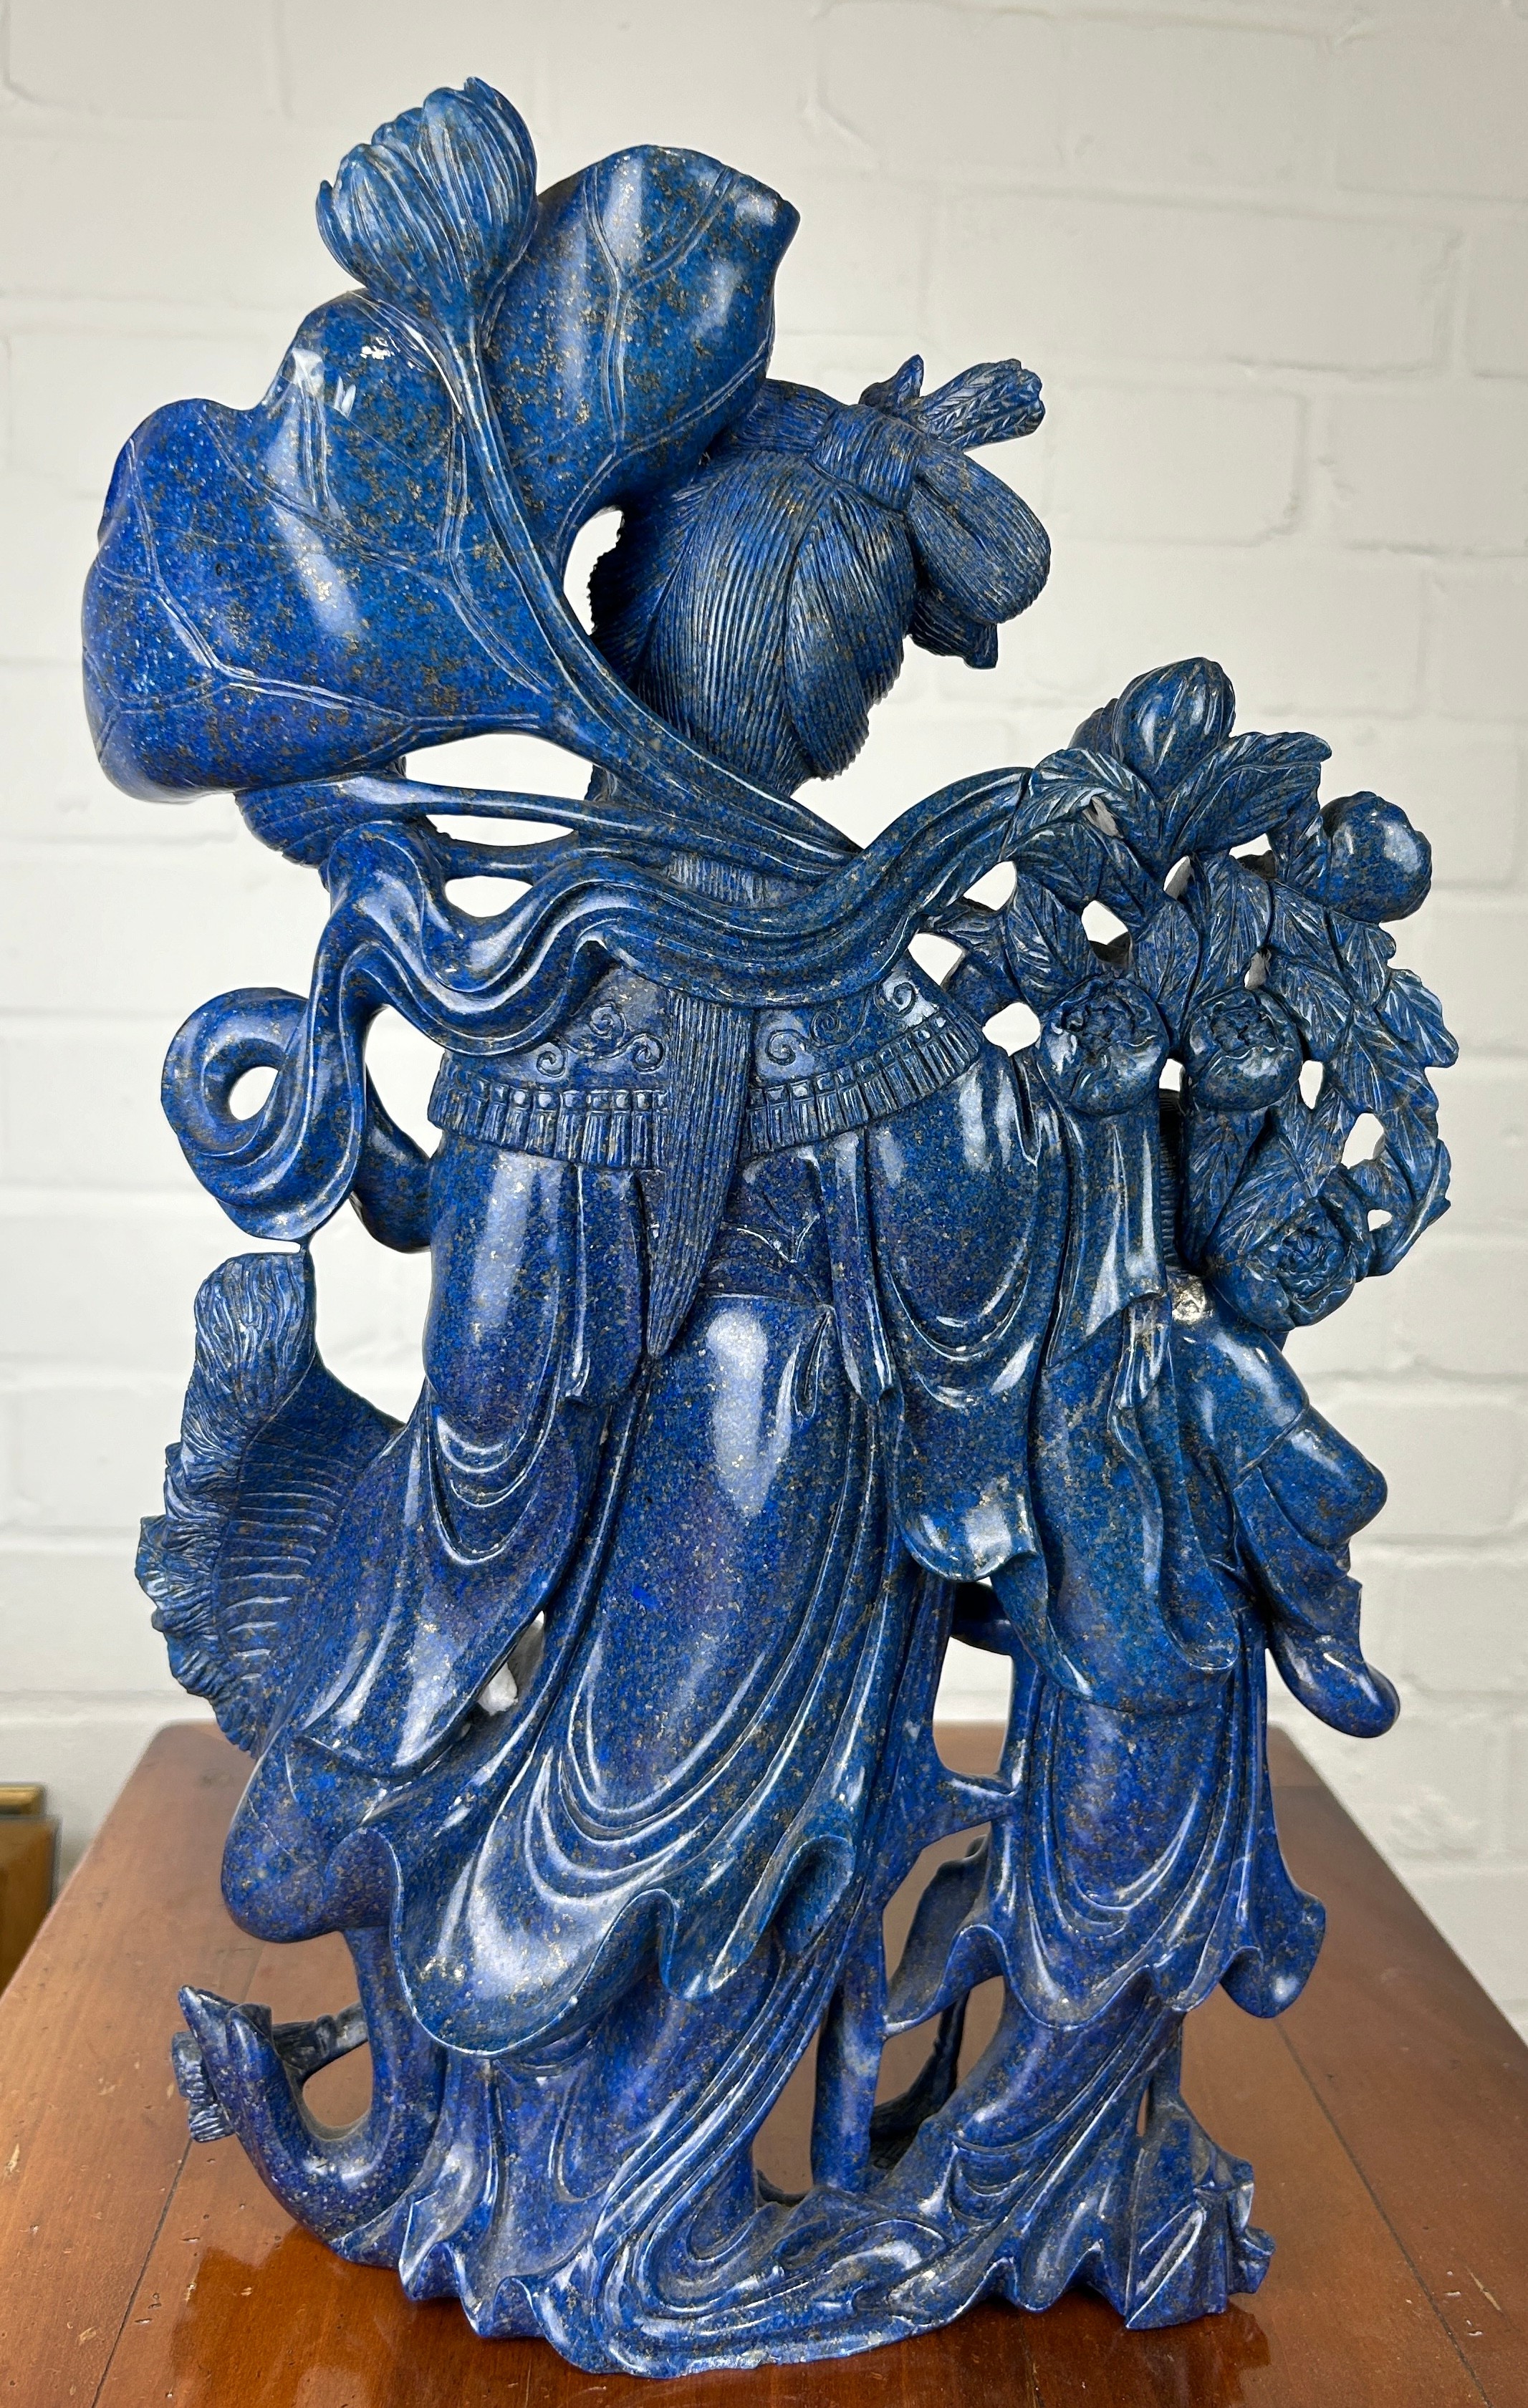 A LARGE EARLY 20TH CENTURY CHINESE LAPIS LAZULI SCULPTURE DEPICTING TWO GUANYINS, 40cm x 25cm - Image 2 of 2